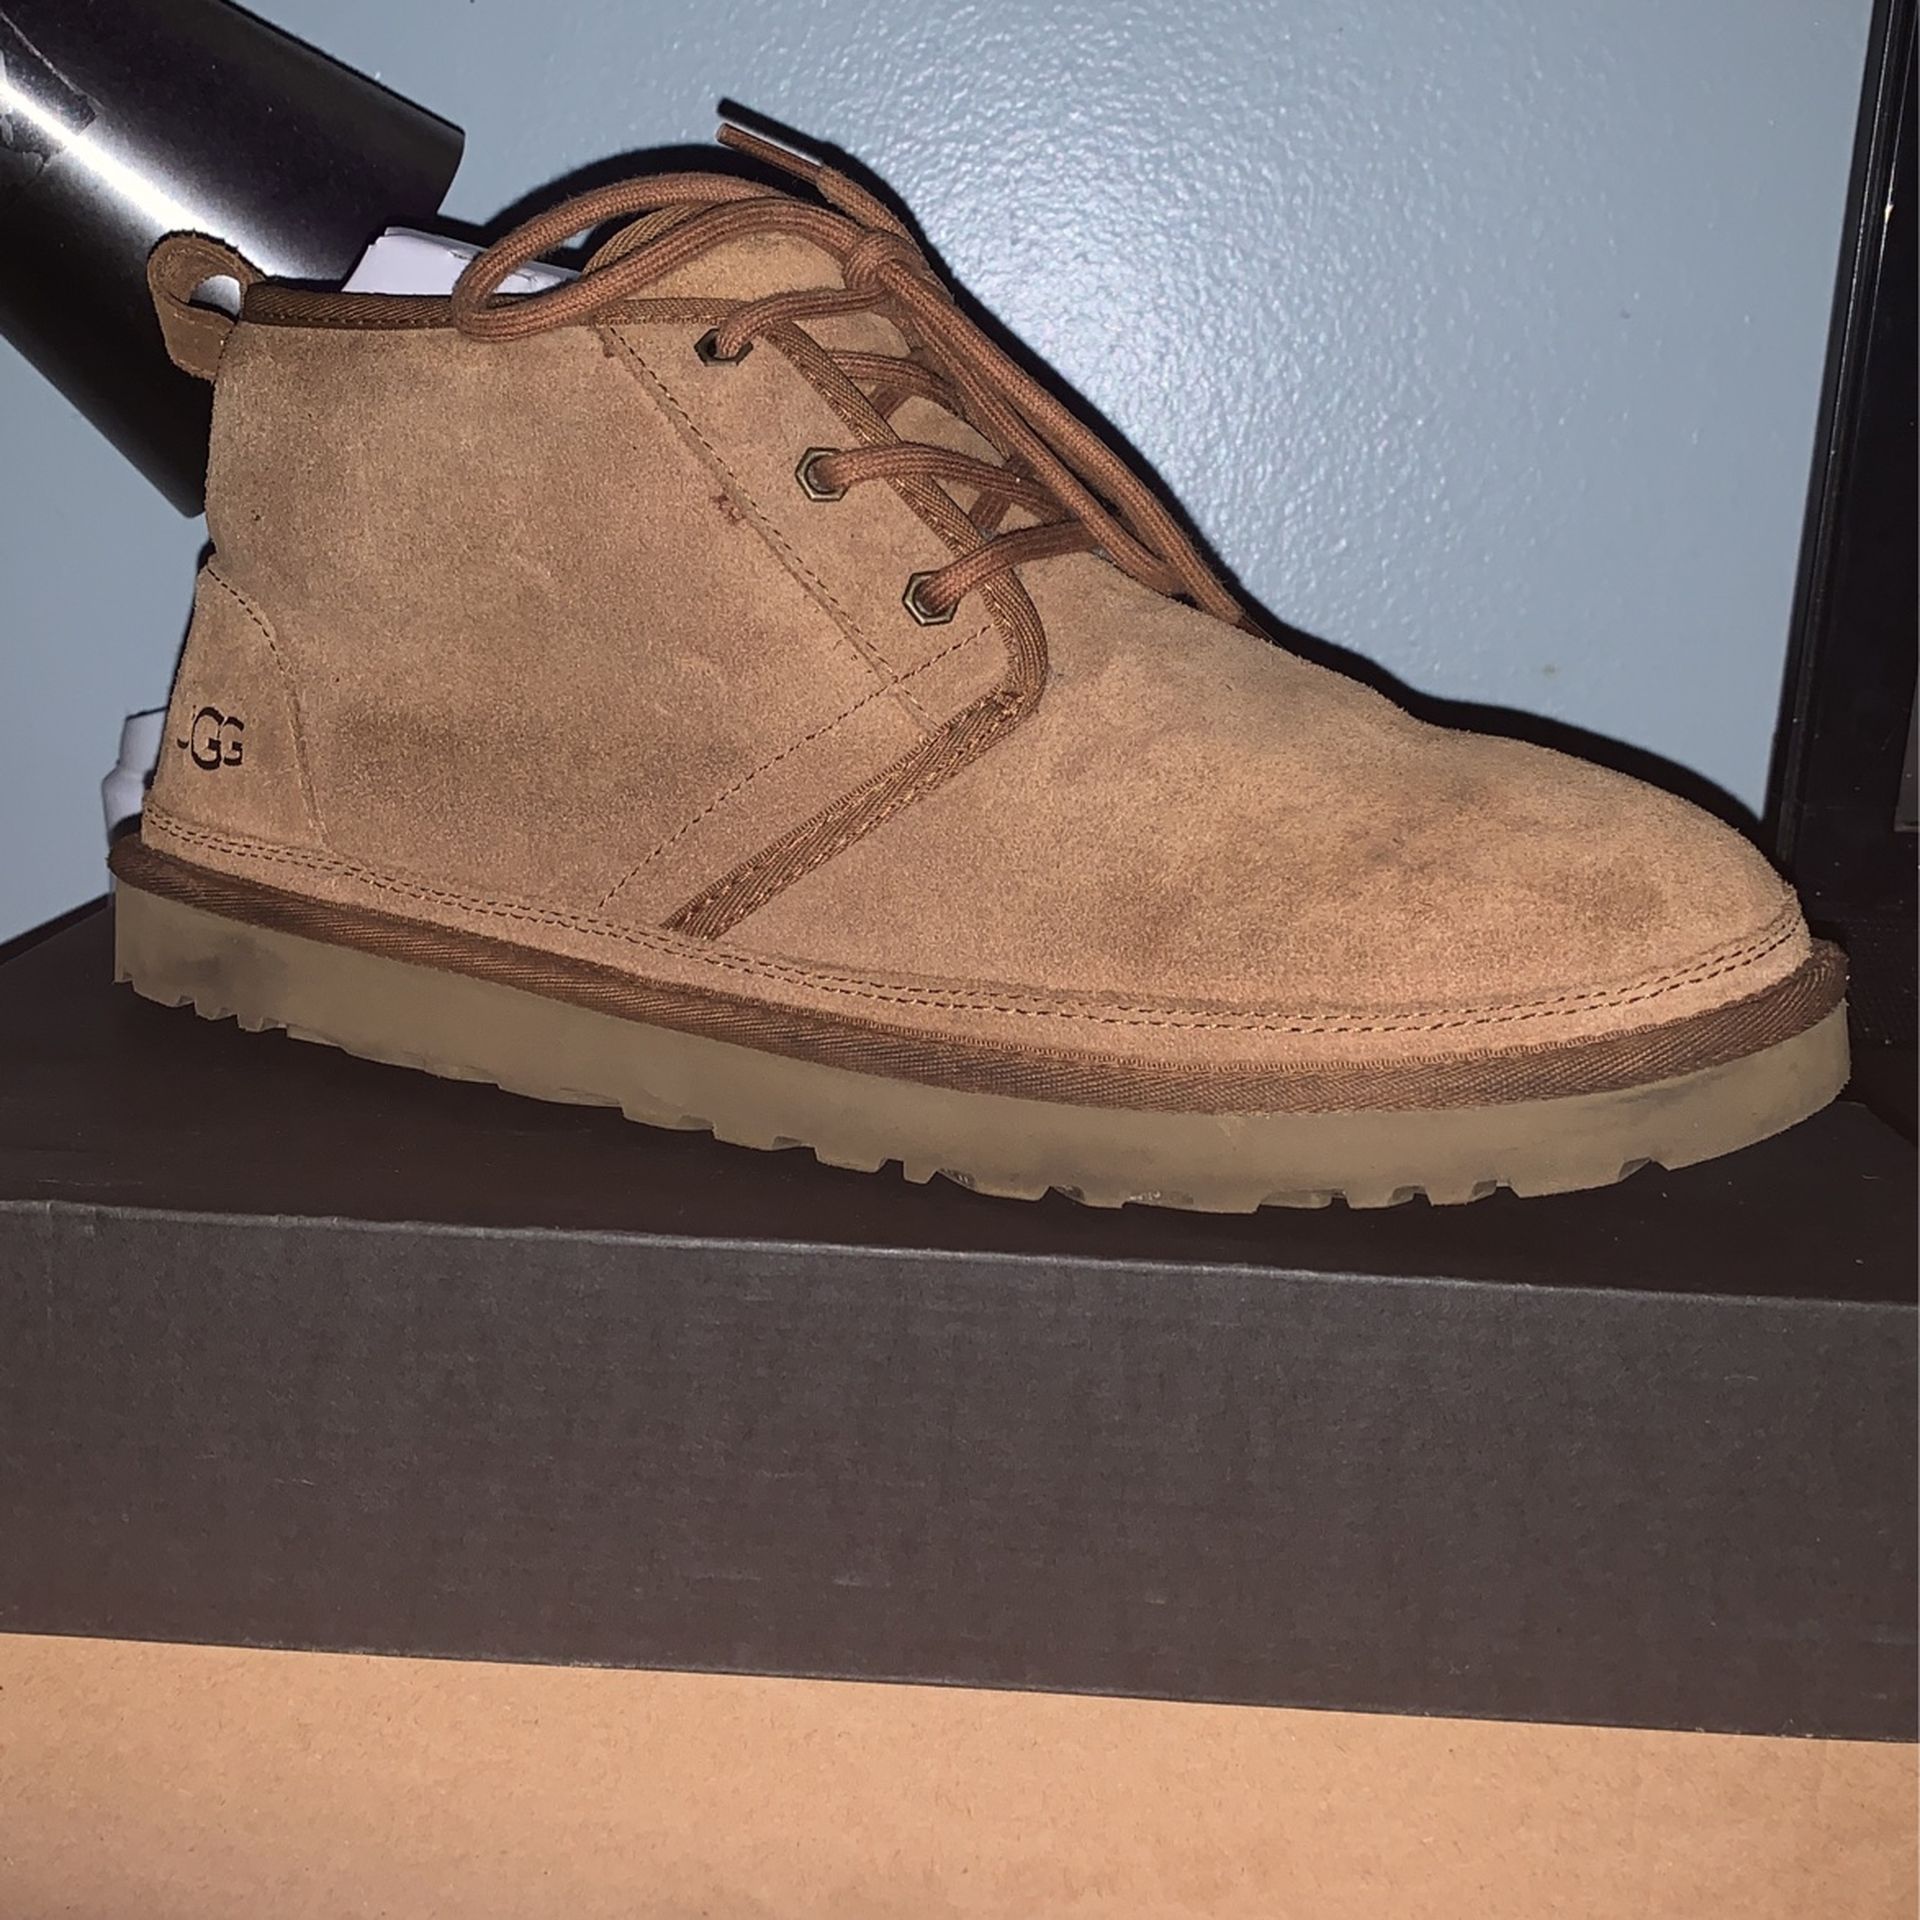 UGG Neumel Size 12 Perfect Condition 